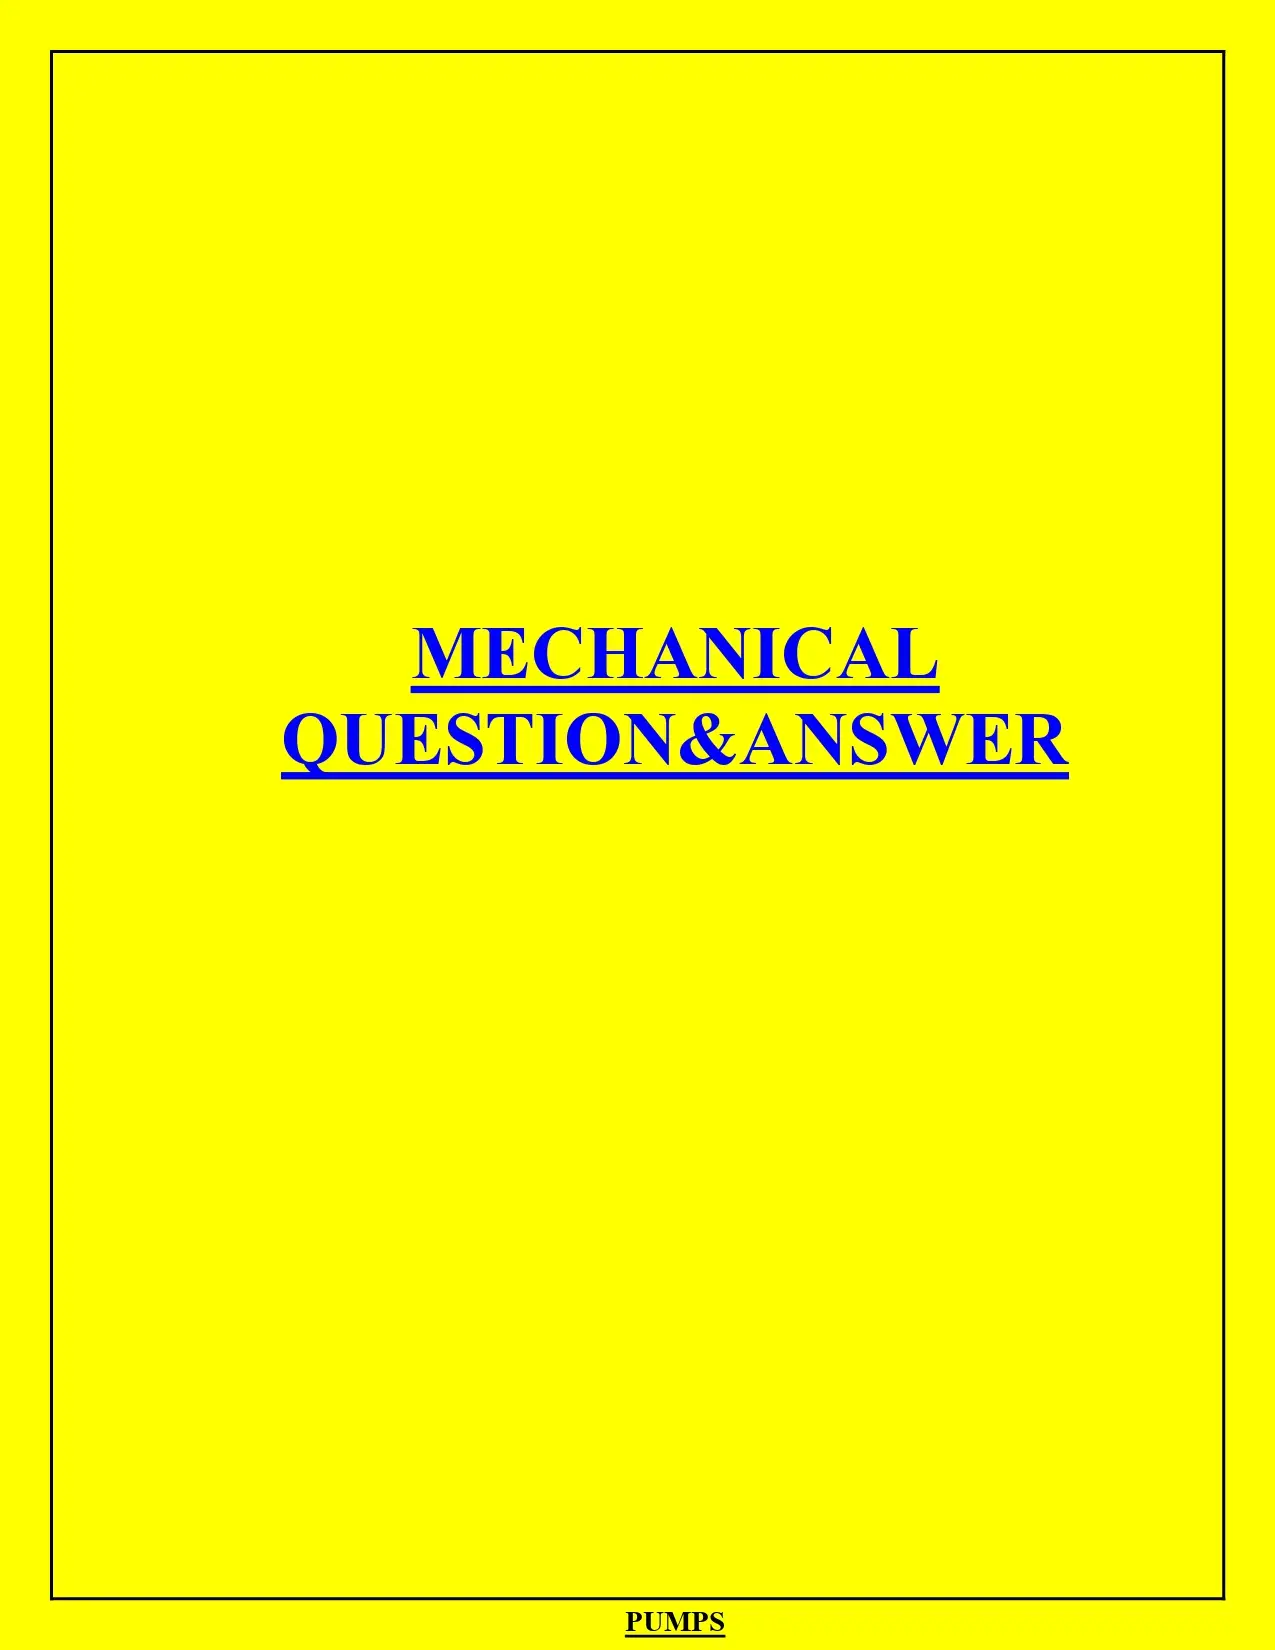 Mechanical Question & Answer